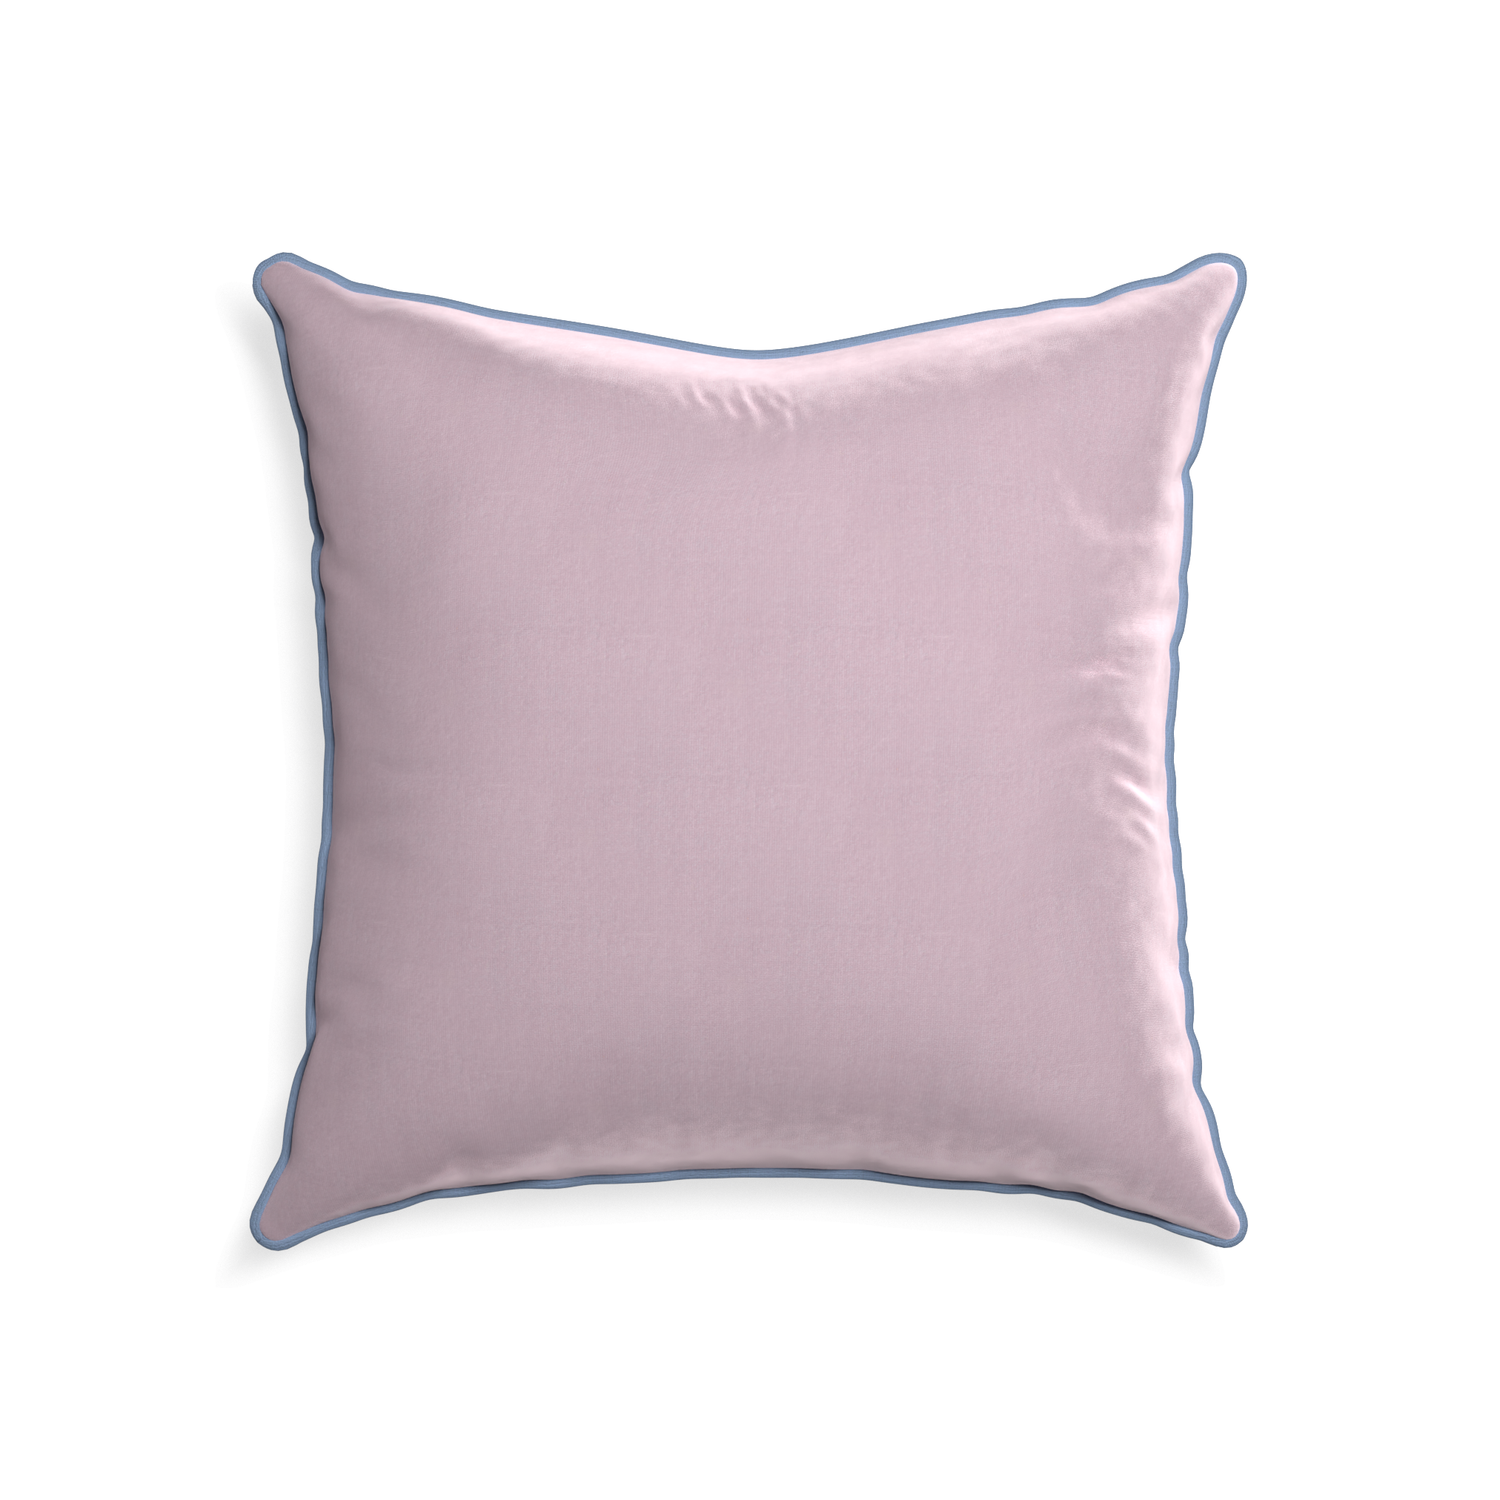 22-square lilac velvet custom pillow with sky piping on white background